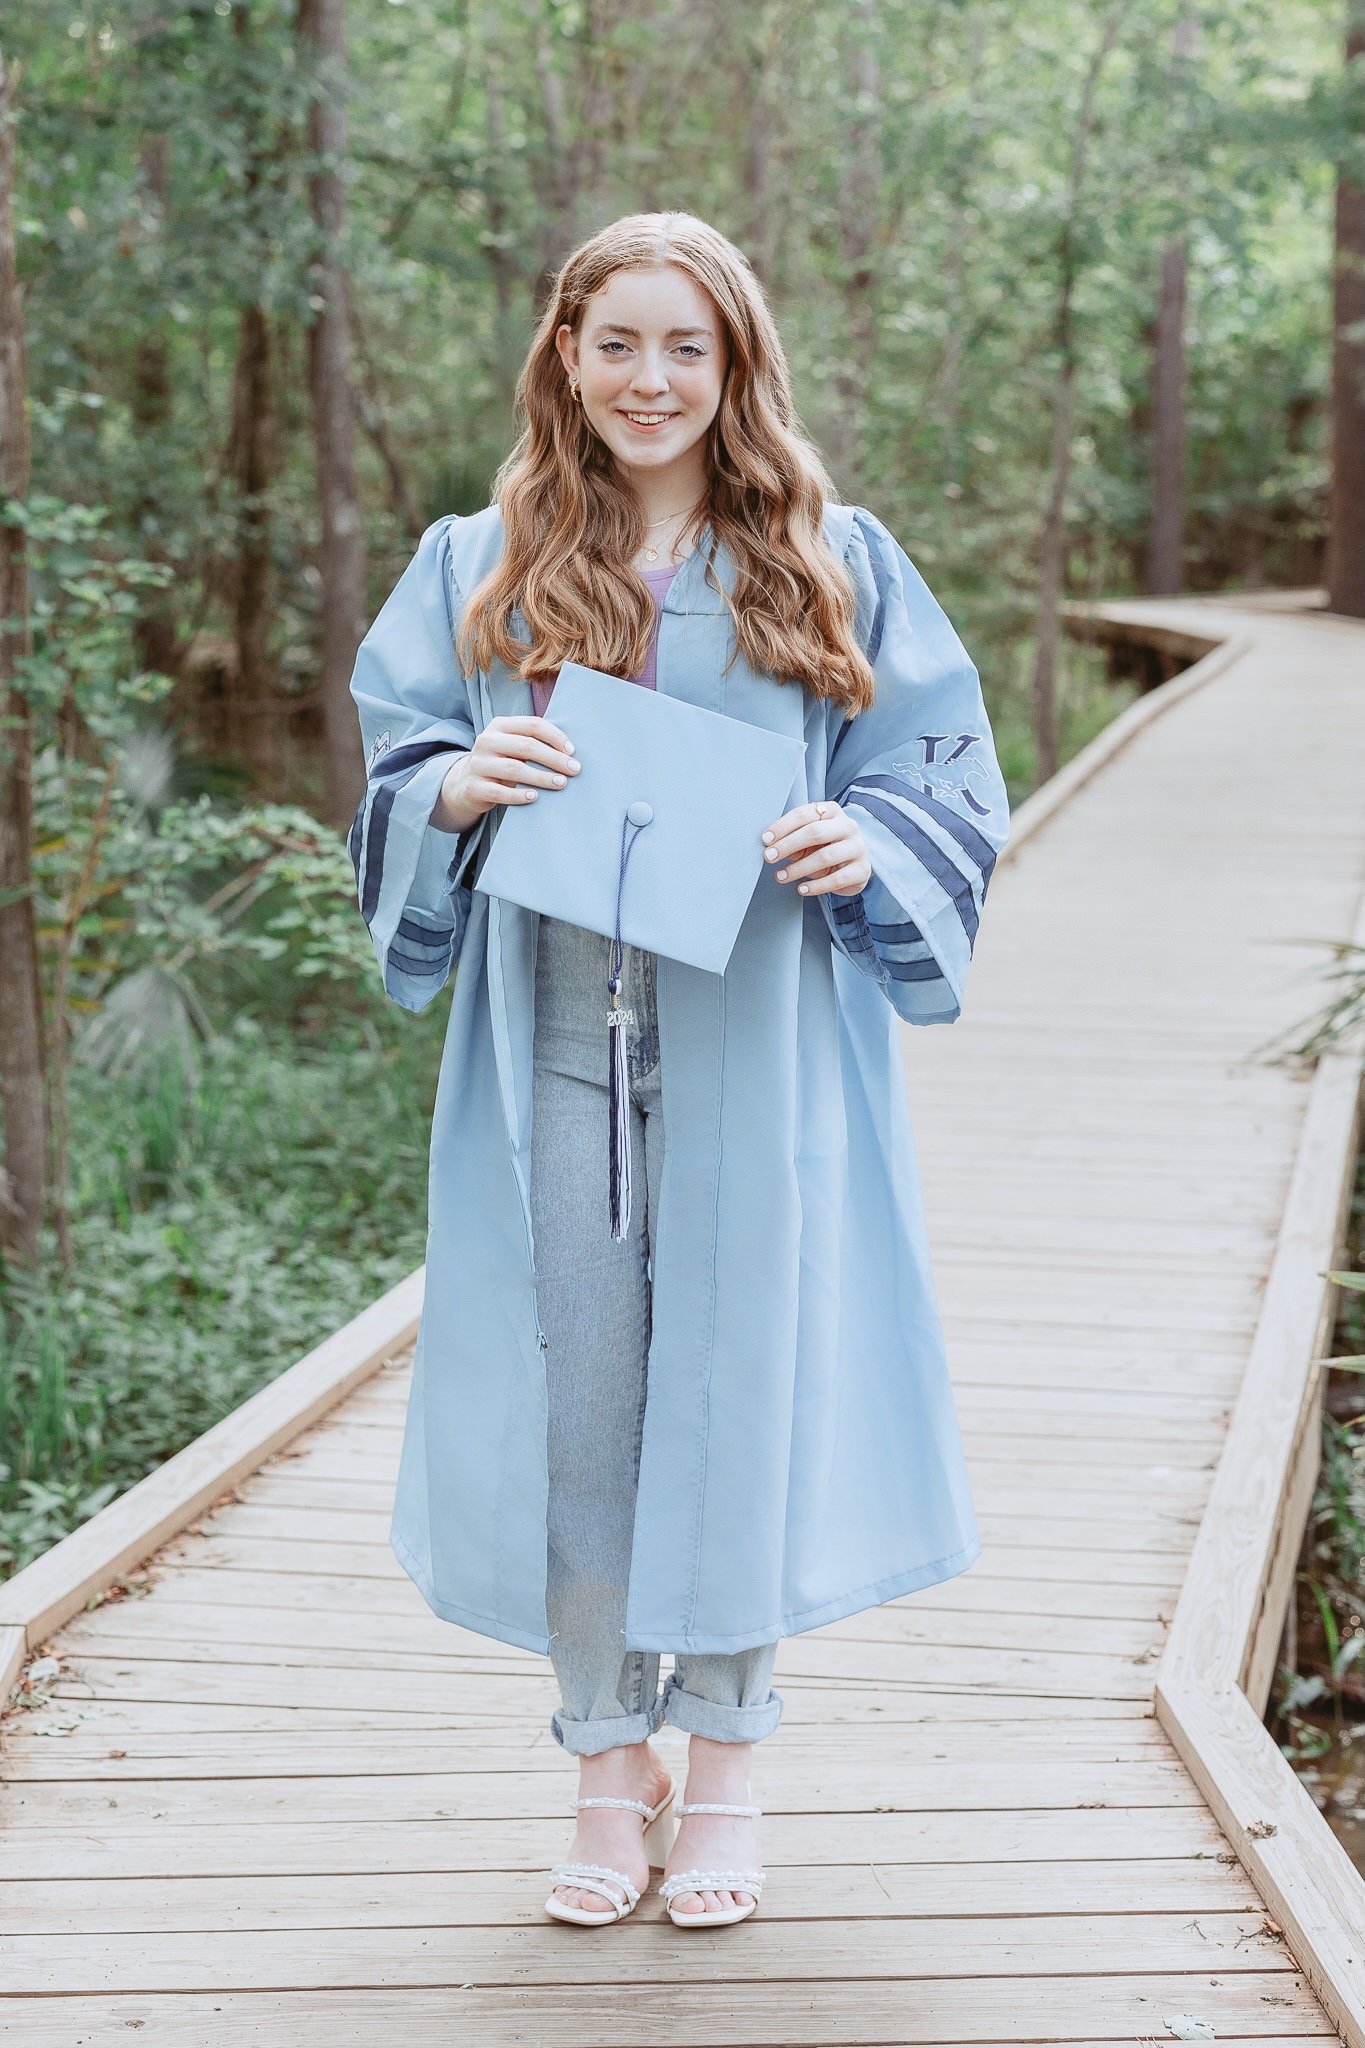 Lily senior cap and gown kingwood east end park